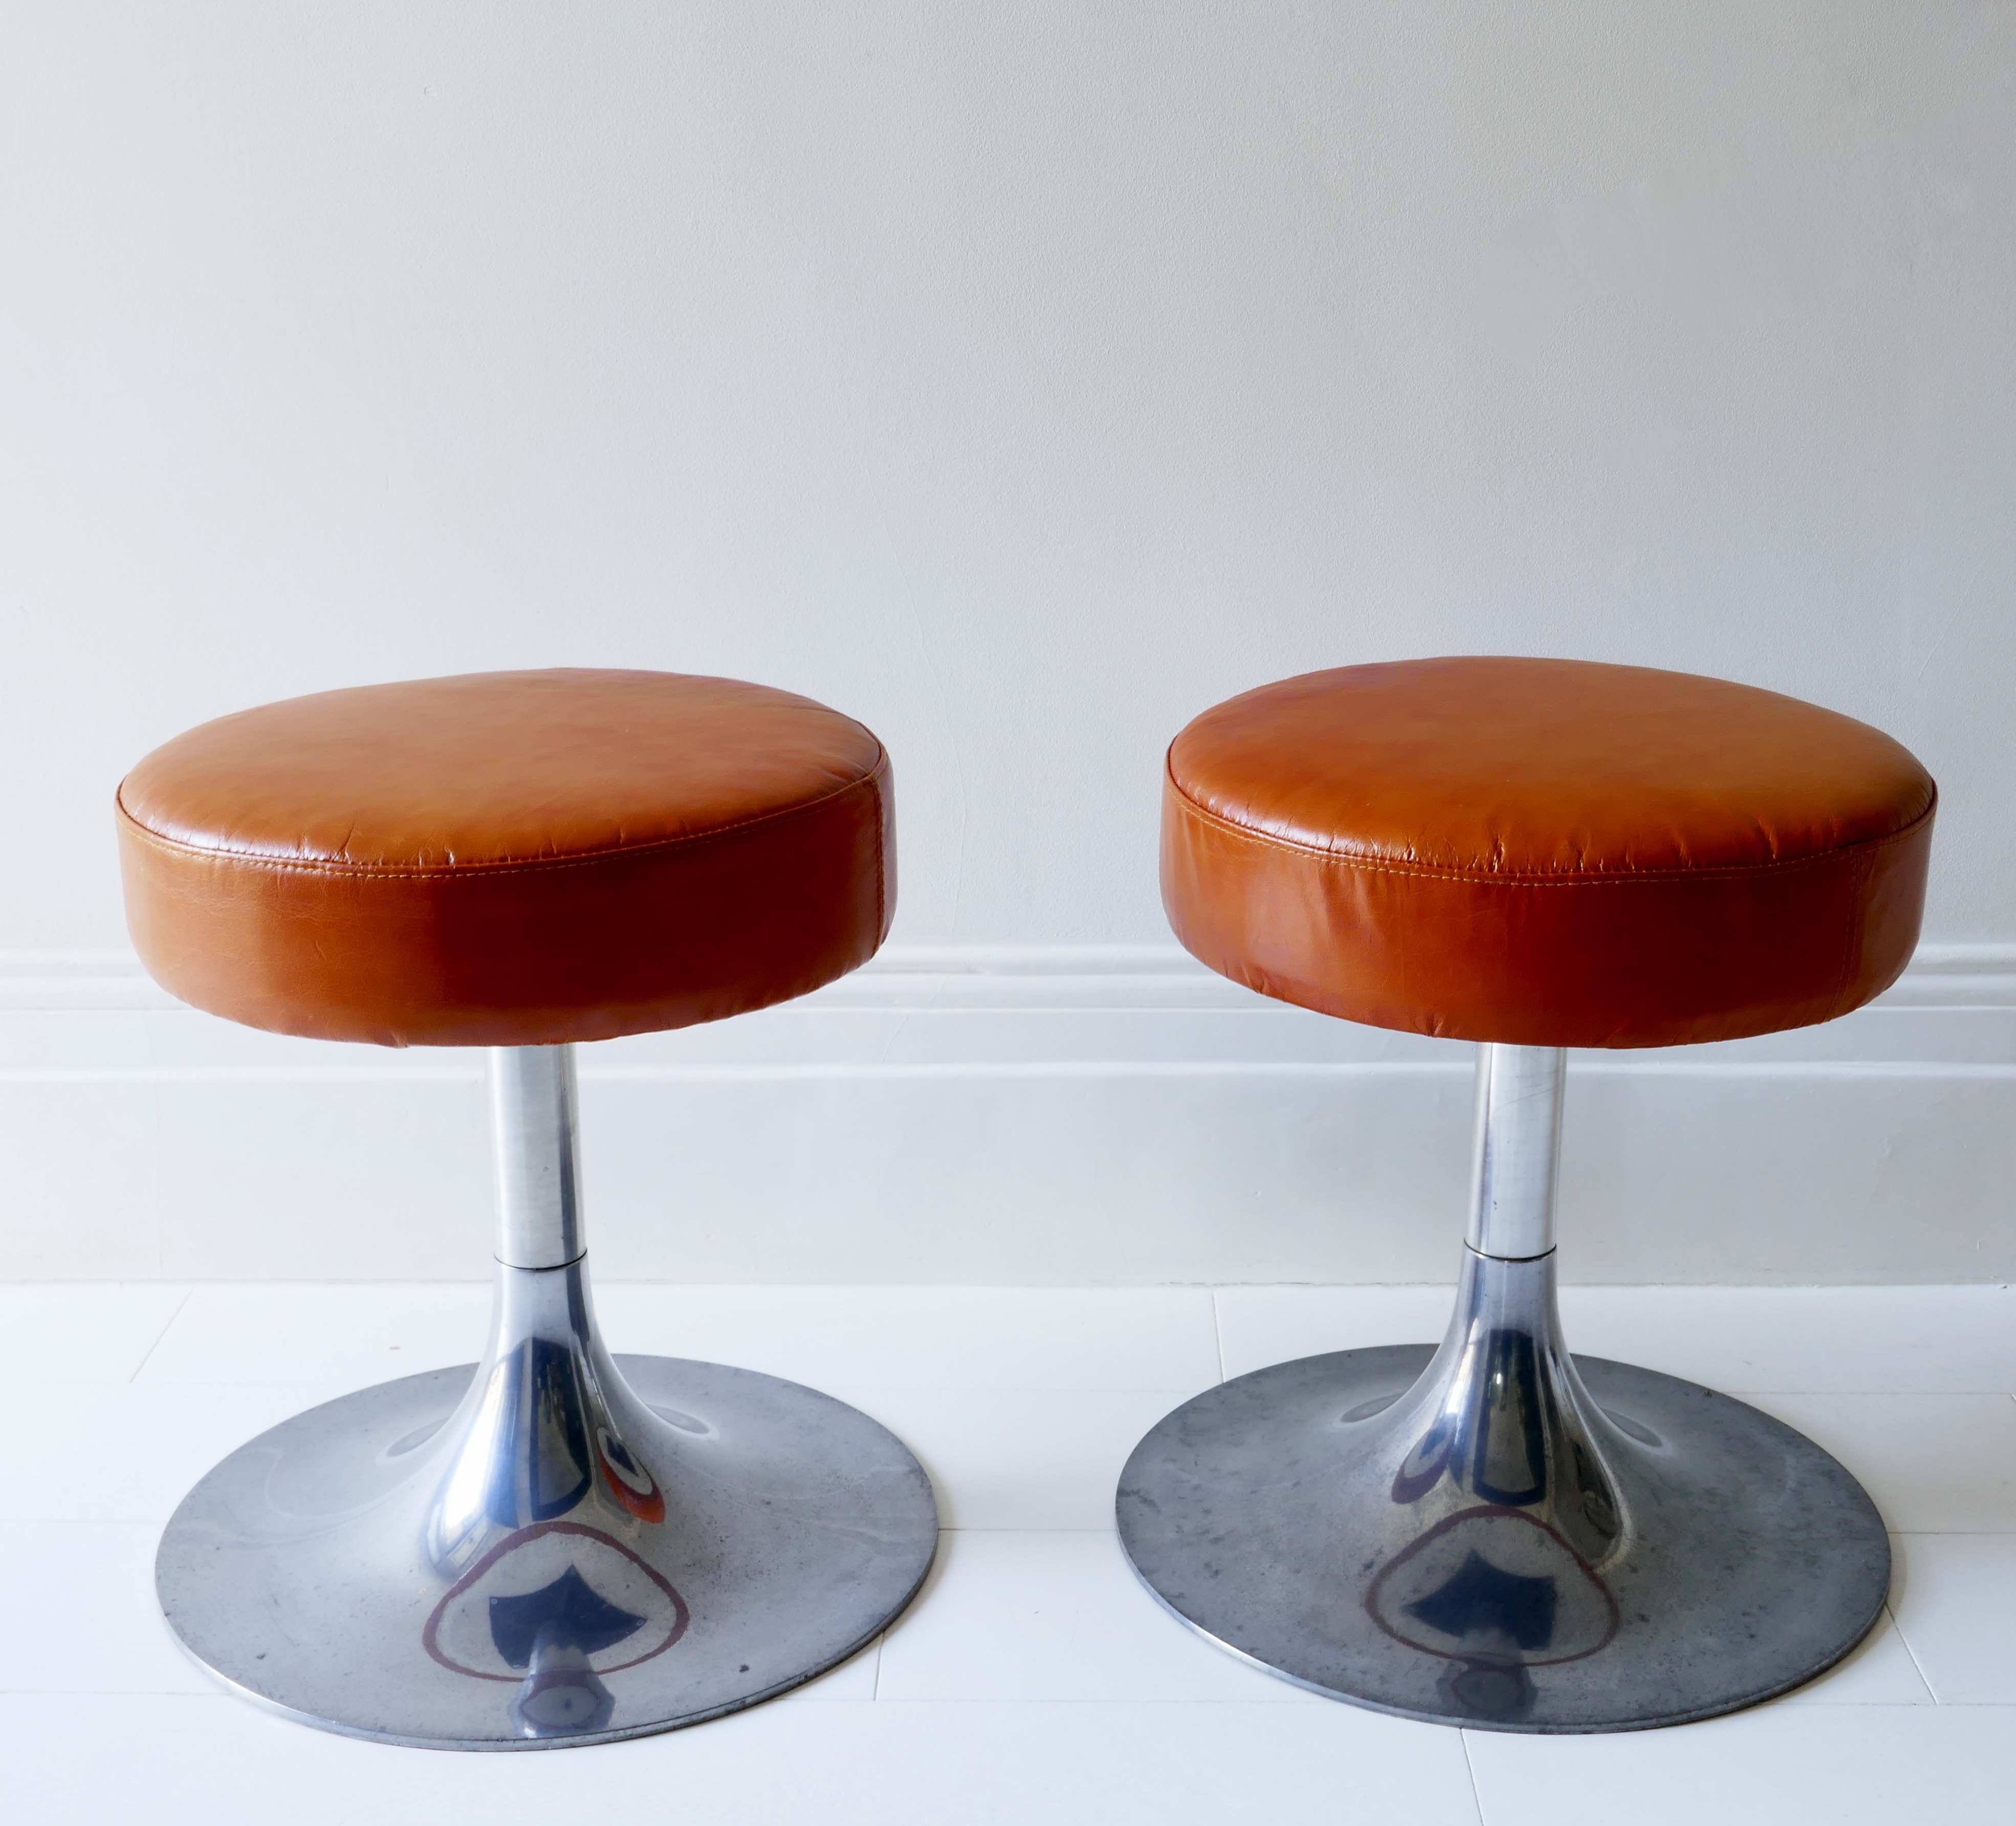 Pair of Chrome and Leather Stools, Italy 1970s